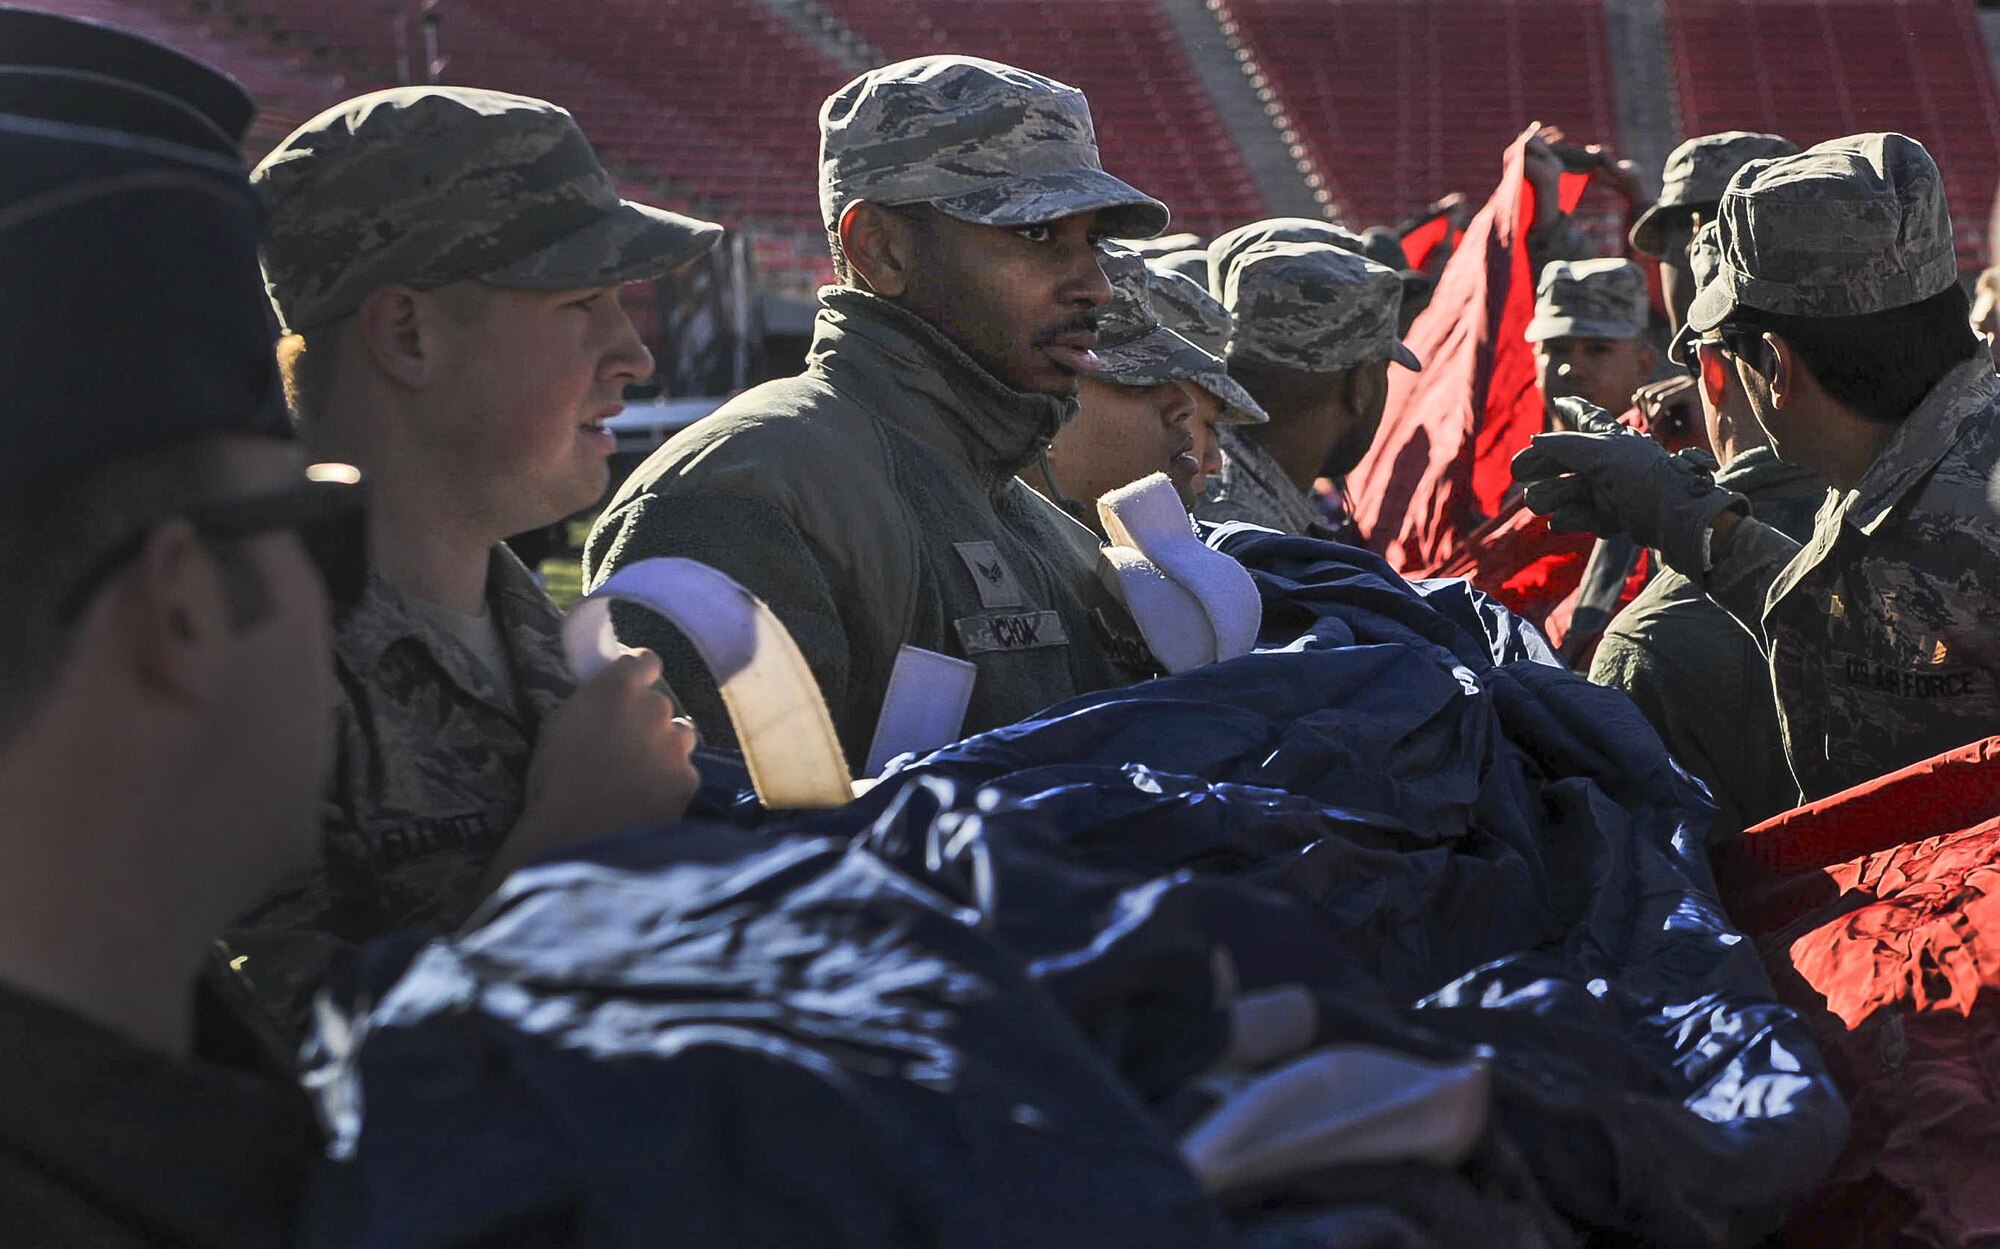 Airmen from Nellis and Creech Air Force Base unfold the American flag at Sam Boyd Stadium before the Las Vegas Bowl, Dec. 17, 2016. Over a 150 Airmen from Nellis and Creech AFB volunteered to hold the flag during the playing of the national anthem before the start of the bowl game. (U.S. Air Force photo by Airman 1st Class Kevin Tanenbaum/Released)